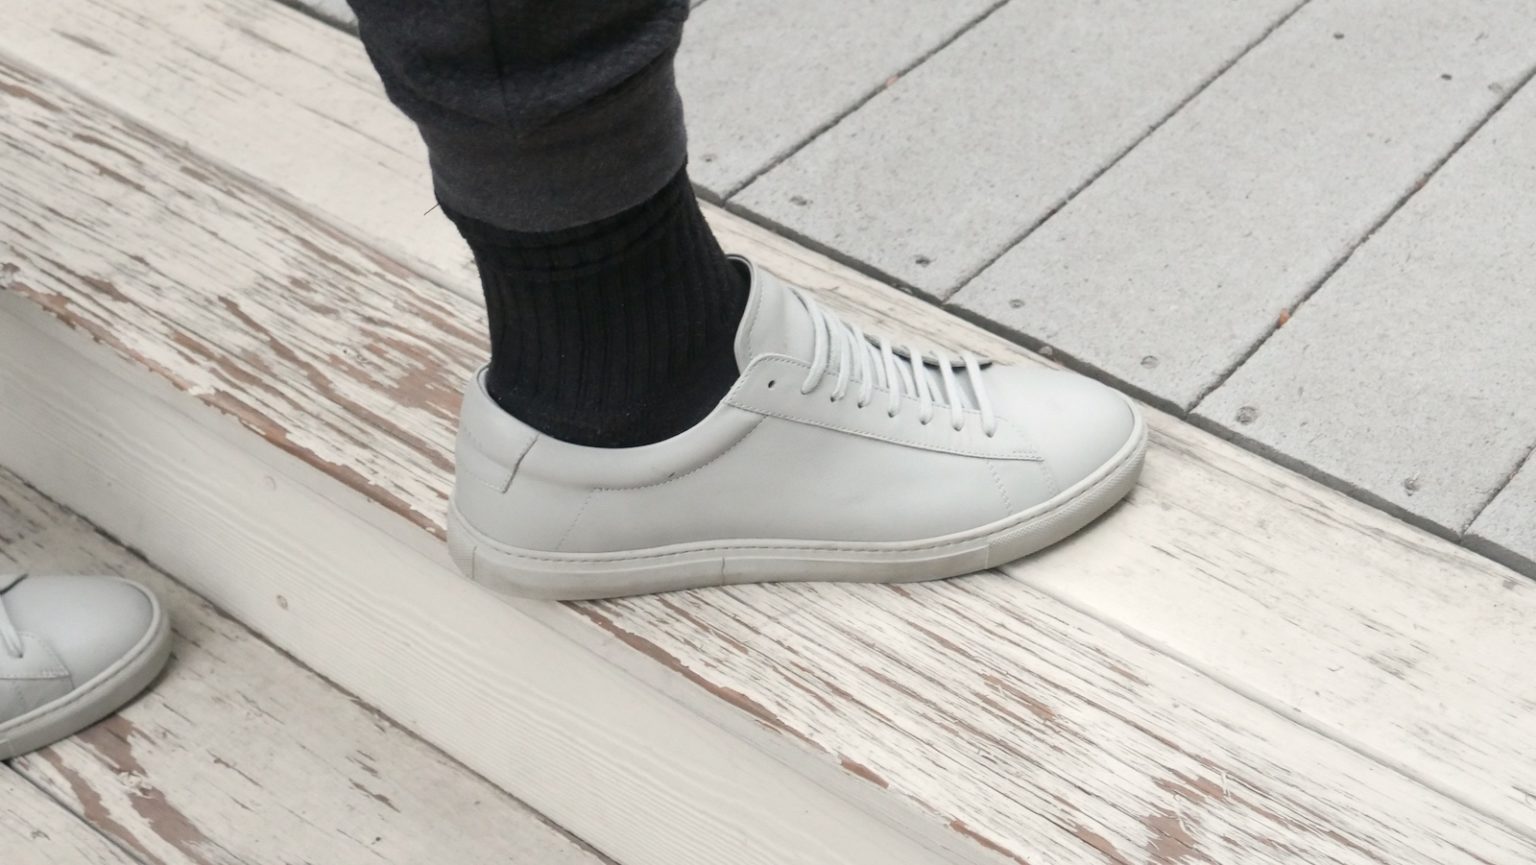 Hands-On Oliver Cabell Low 1 Sneaker Review: Affordable Luxury? - The ...